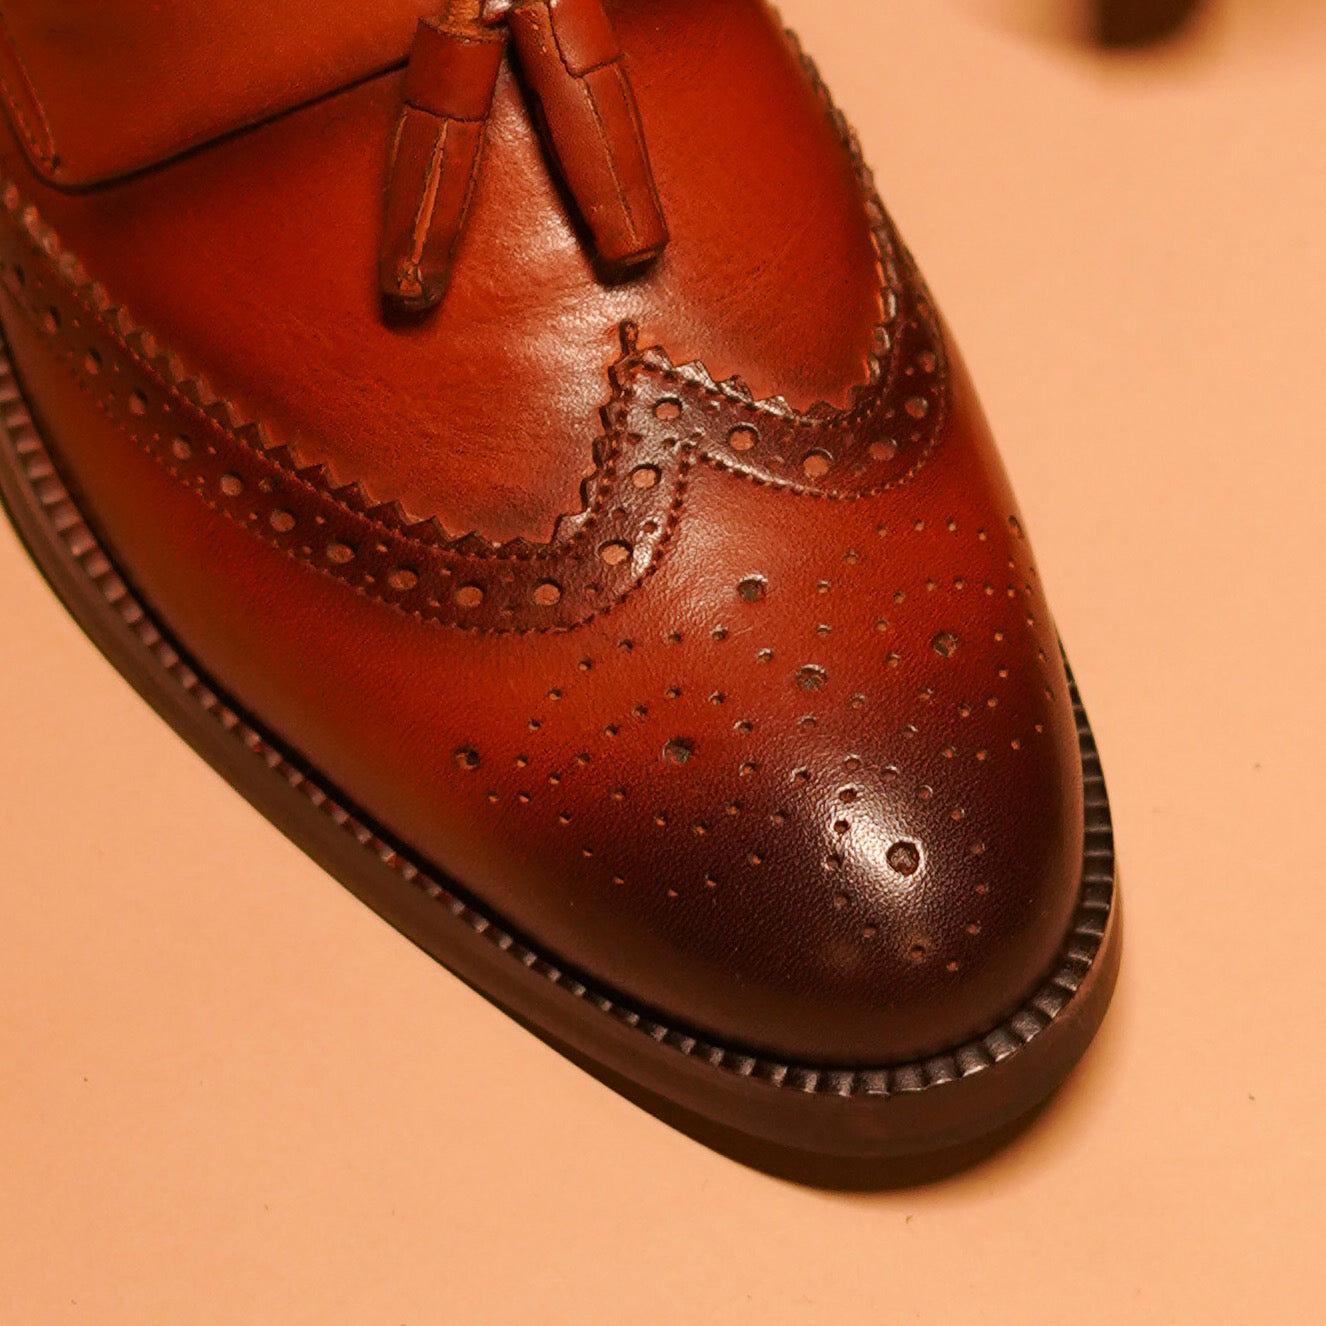 Detailed craftsmanship on Motivo Broguo with full wingtip brogue pattern and luxurious tassel.